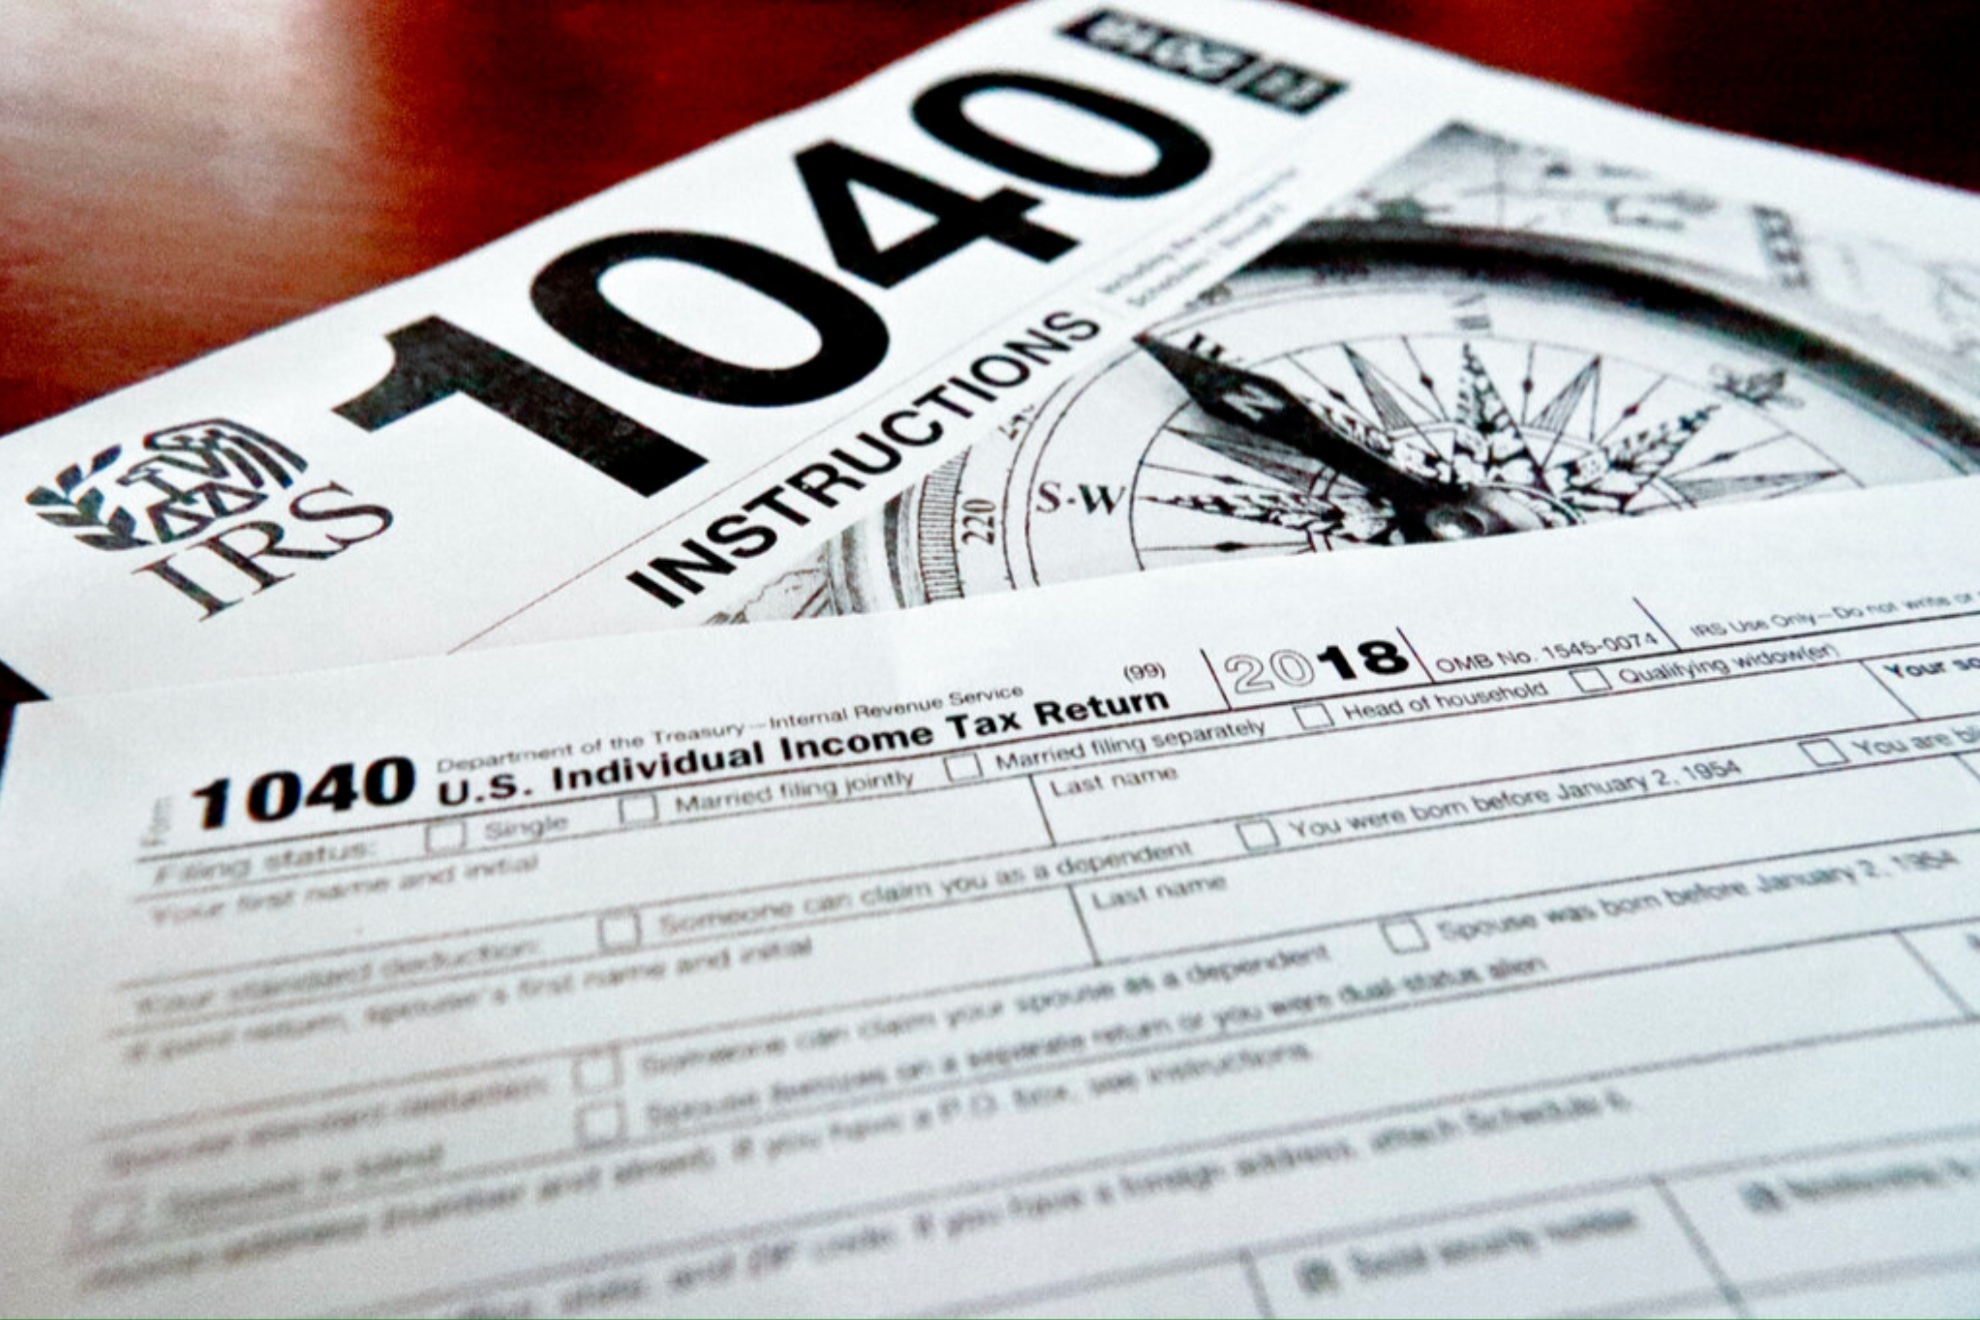 The deadline to file your tax return is Oct 16